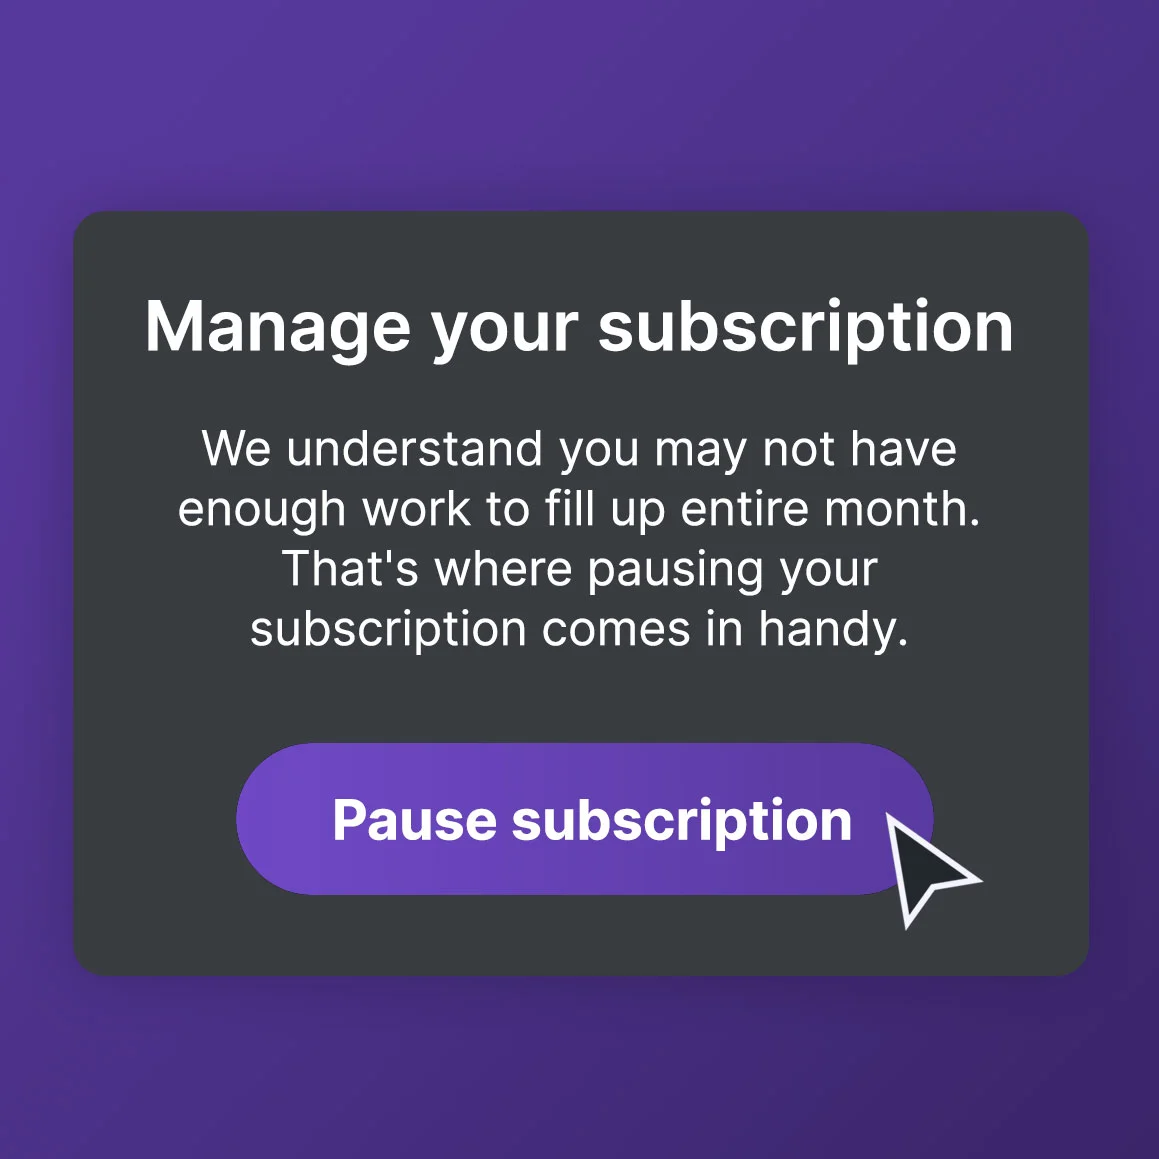 Image illustrating the ability to pause your subscription